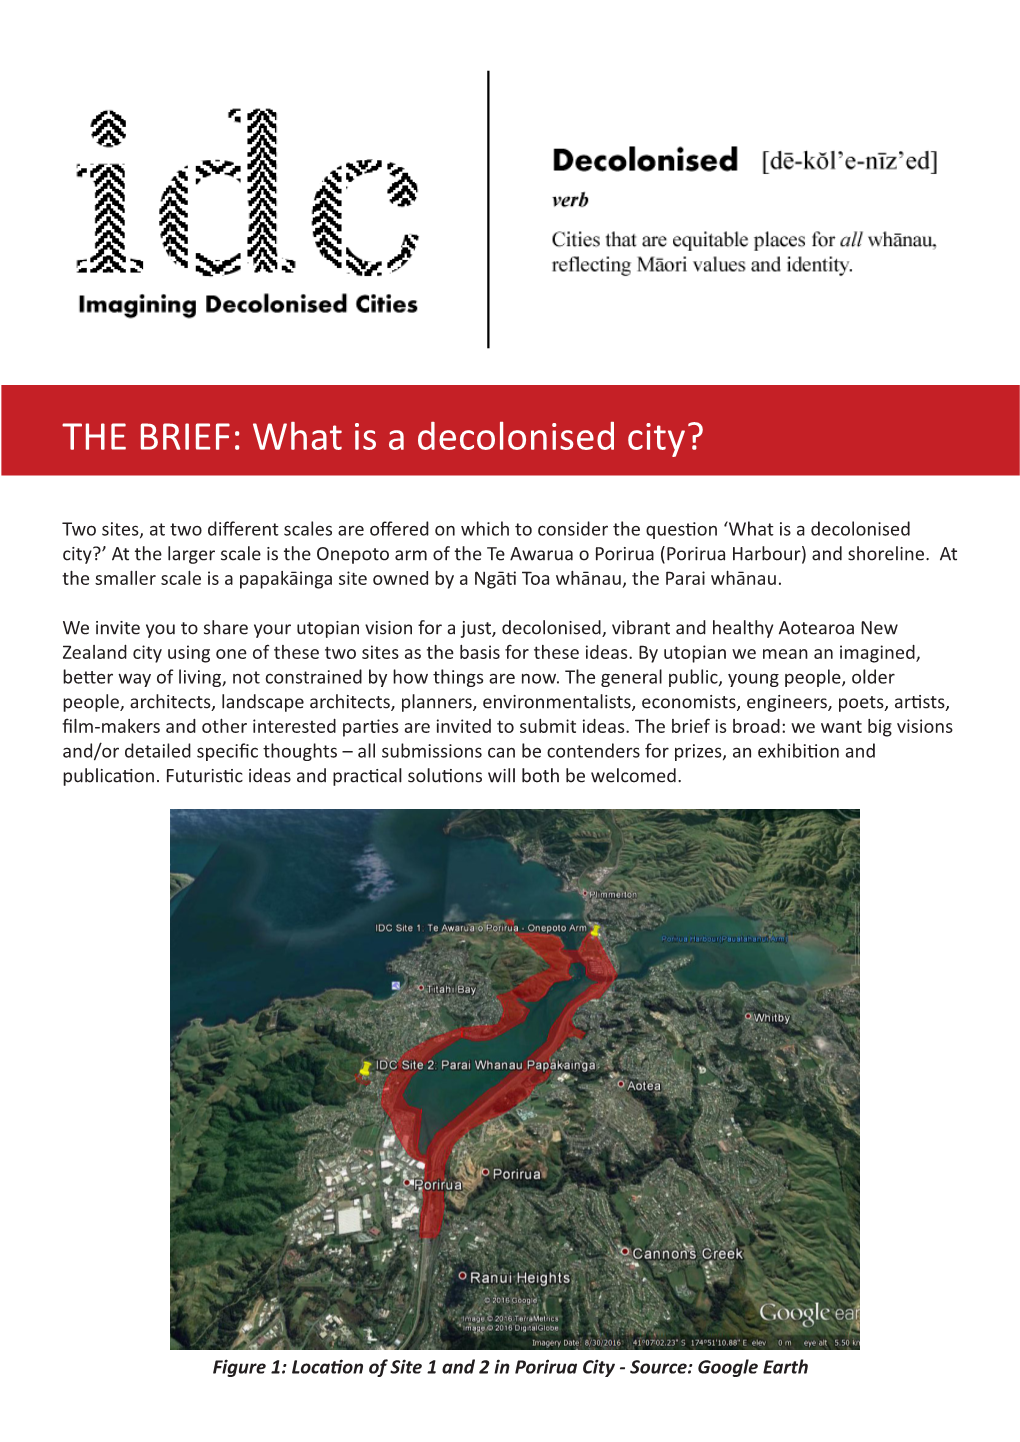 THE BRIEF: What Is a Decolonised City?